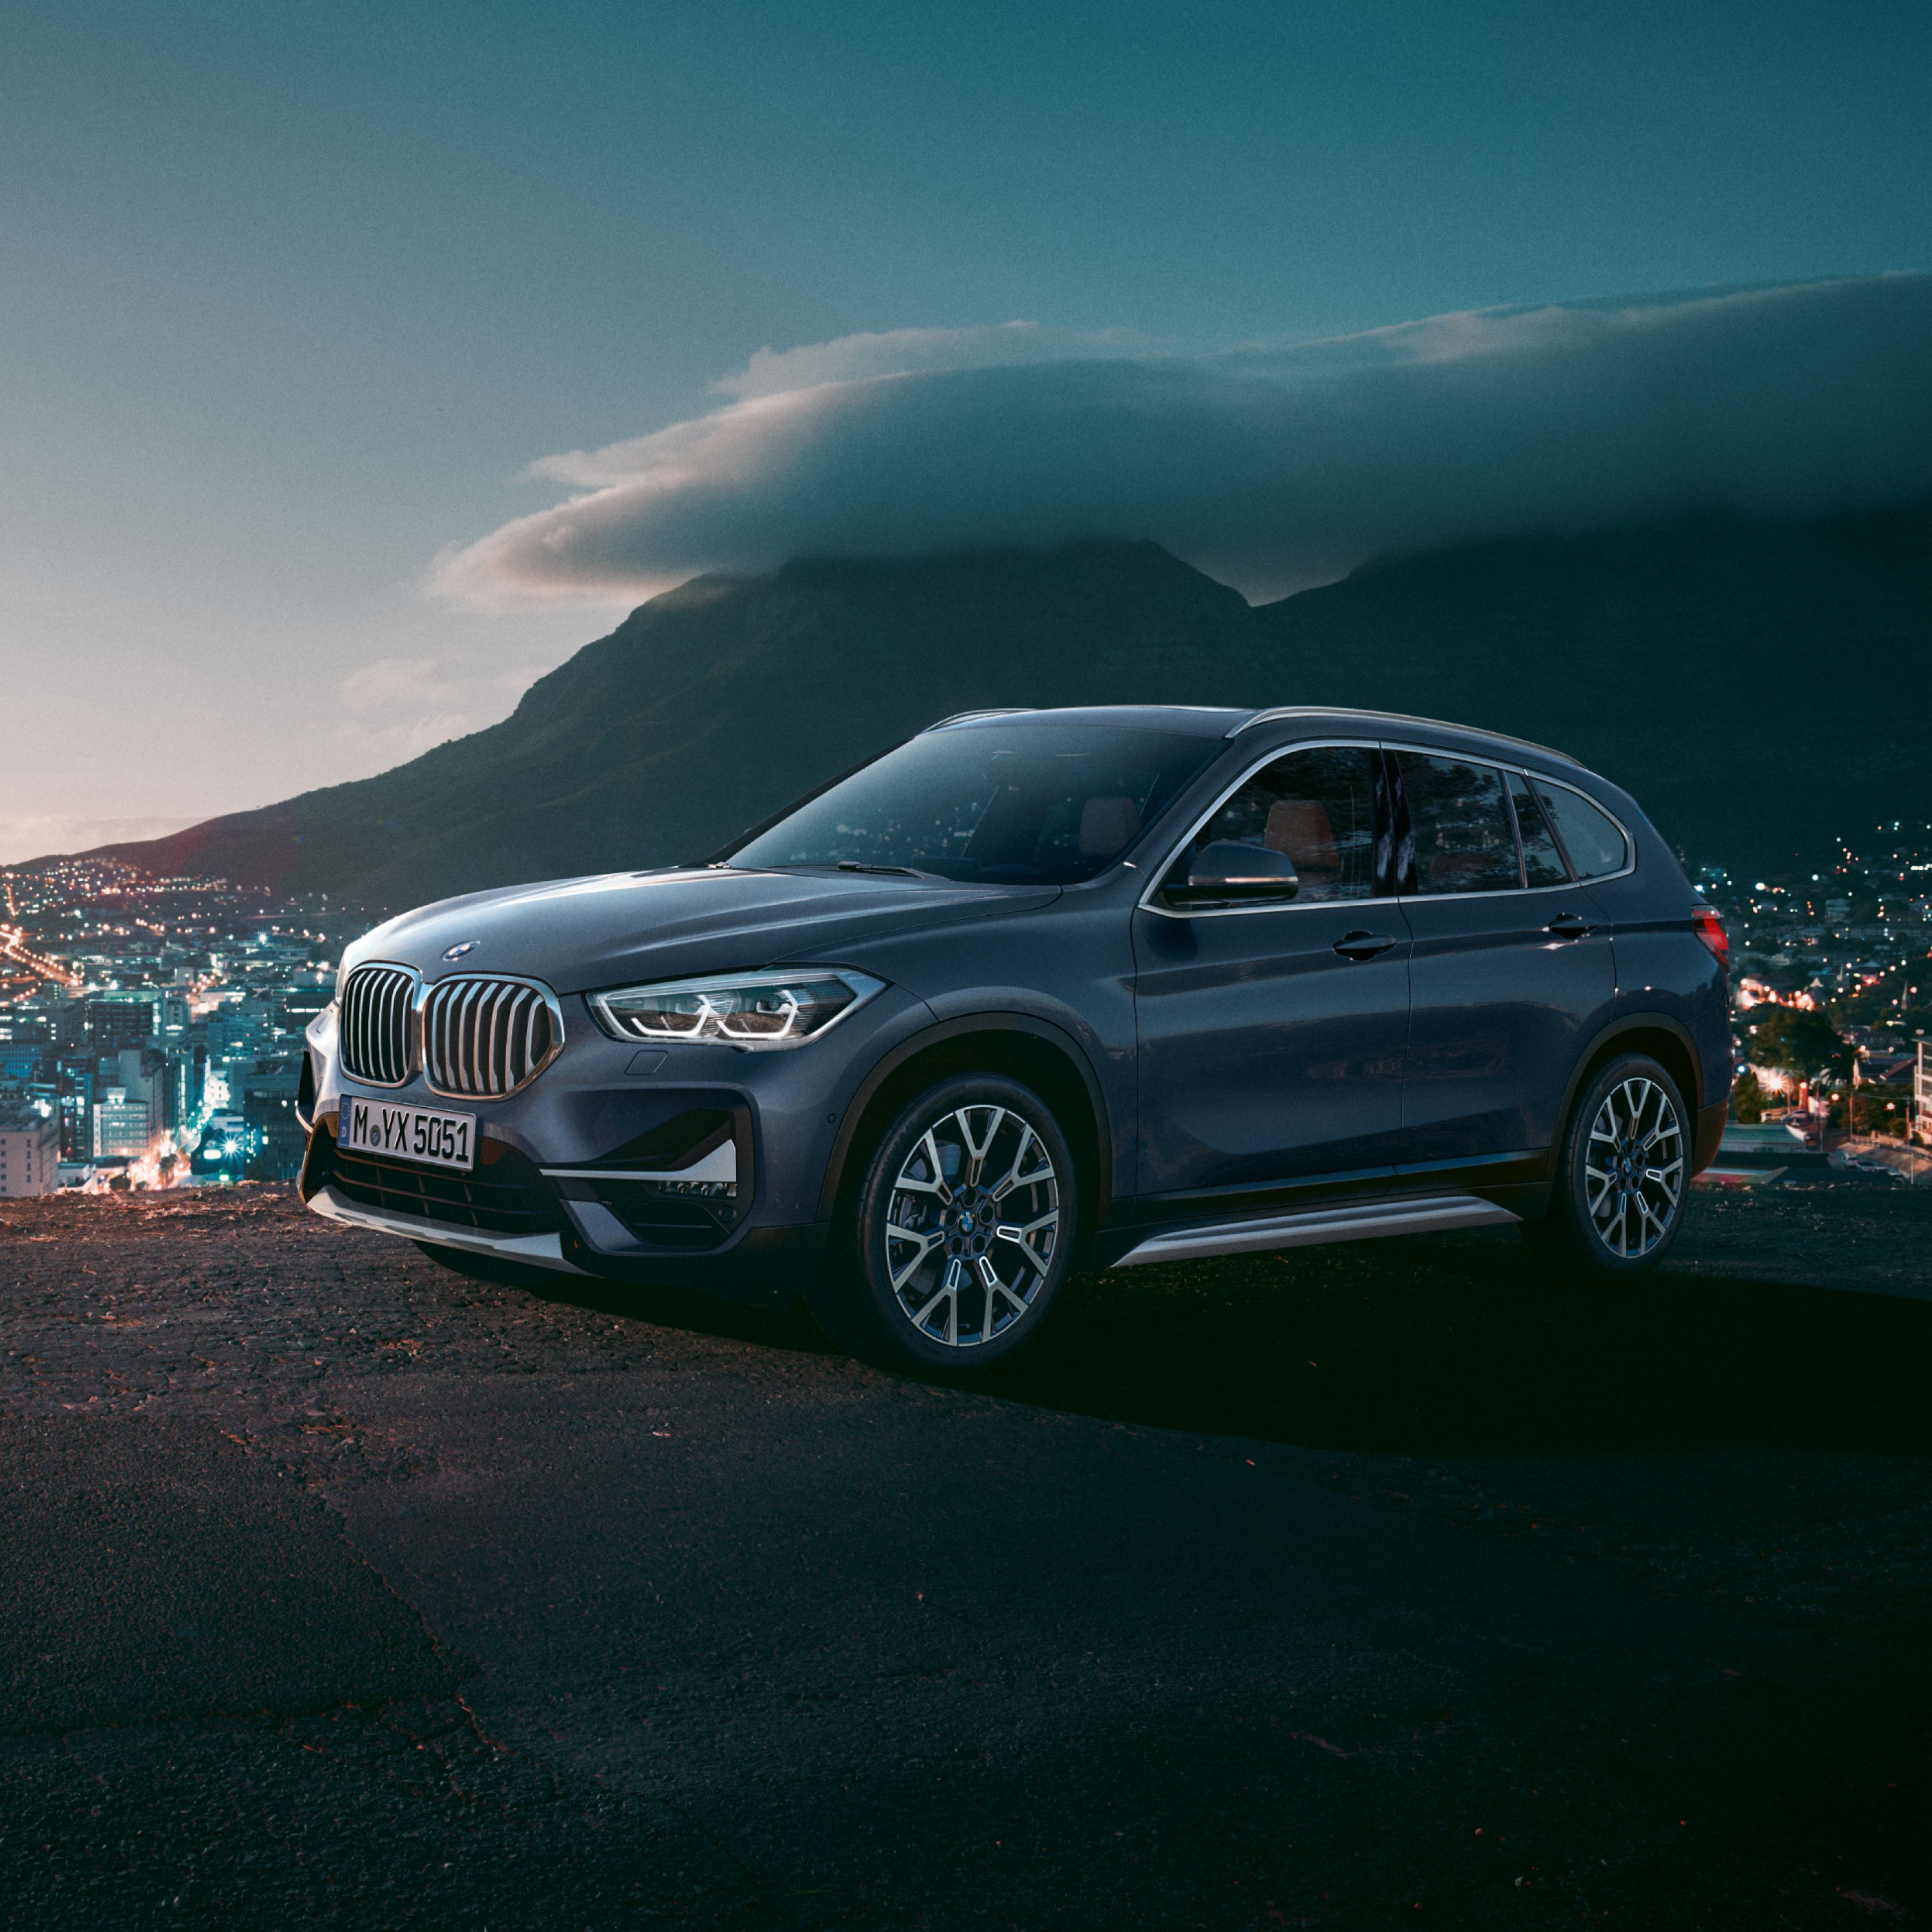 BMW X1 F48 SUV on a plateau with a city panorama behind it and a mountain range in the background